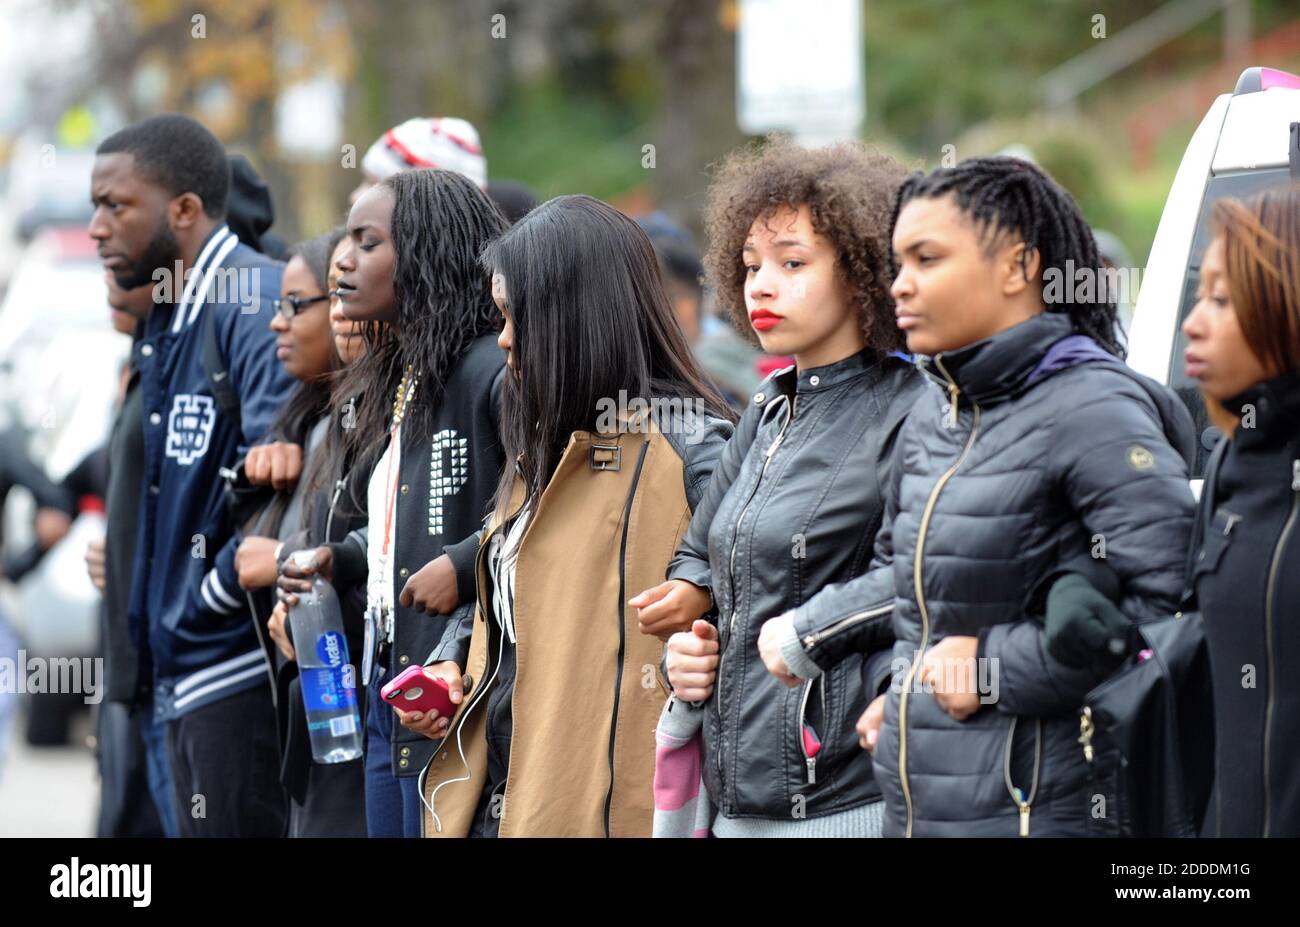 NO FILM, NO VIDEO, NO TV, NO DOCUMENTARY - Morgan State students block the intersection of Perring Parkway and Cold Spring Lane during a rally in Baltimore, MD, USA, on Tuesday, Nov. 25, 2014, in the wake of the grand jury decision not to indict officer Darren Wilson in the shooting death of Ferguson, Mo., teen Michael Brown. Photo by Jerry Jackson/Baltimore Sun/TNS/ABACAPRESS.COM Stock Photo